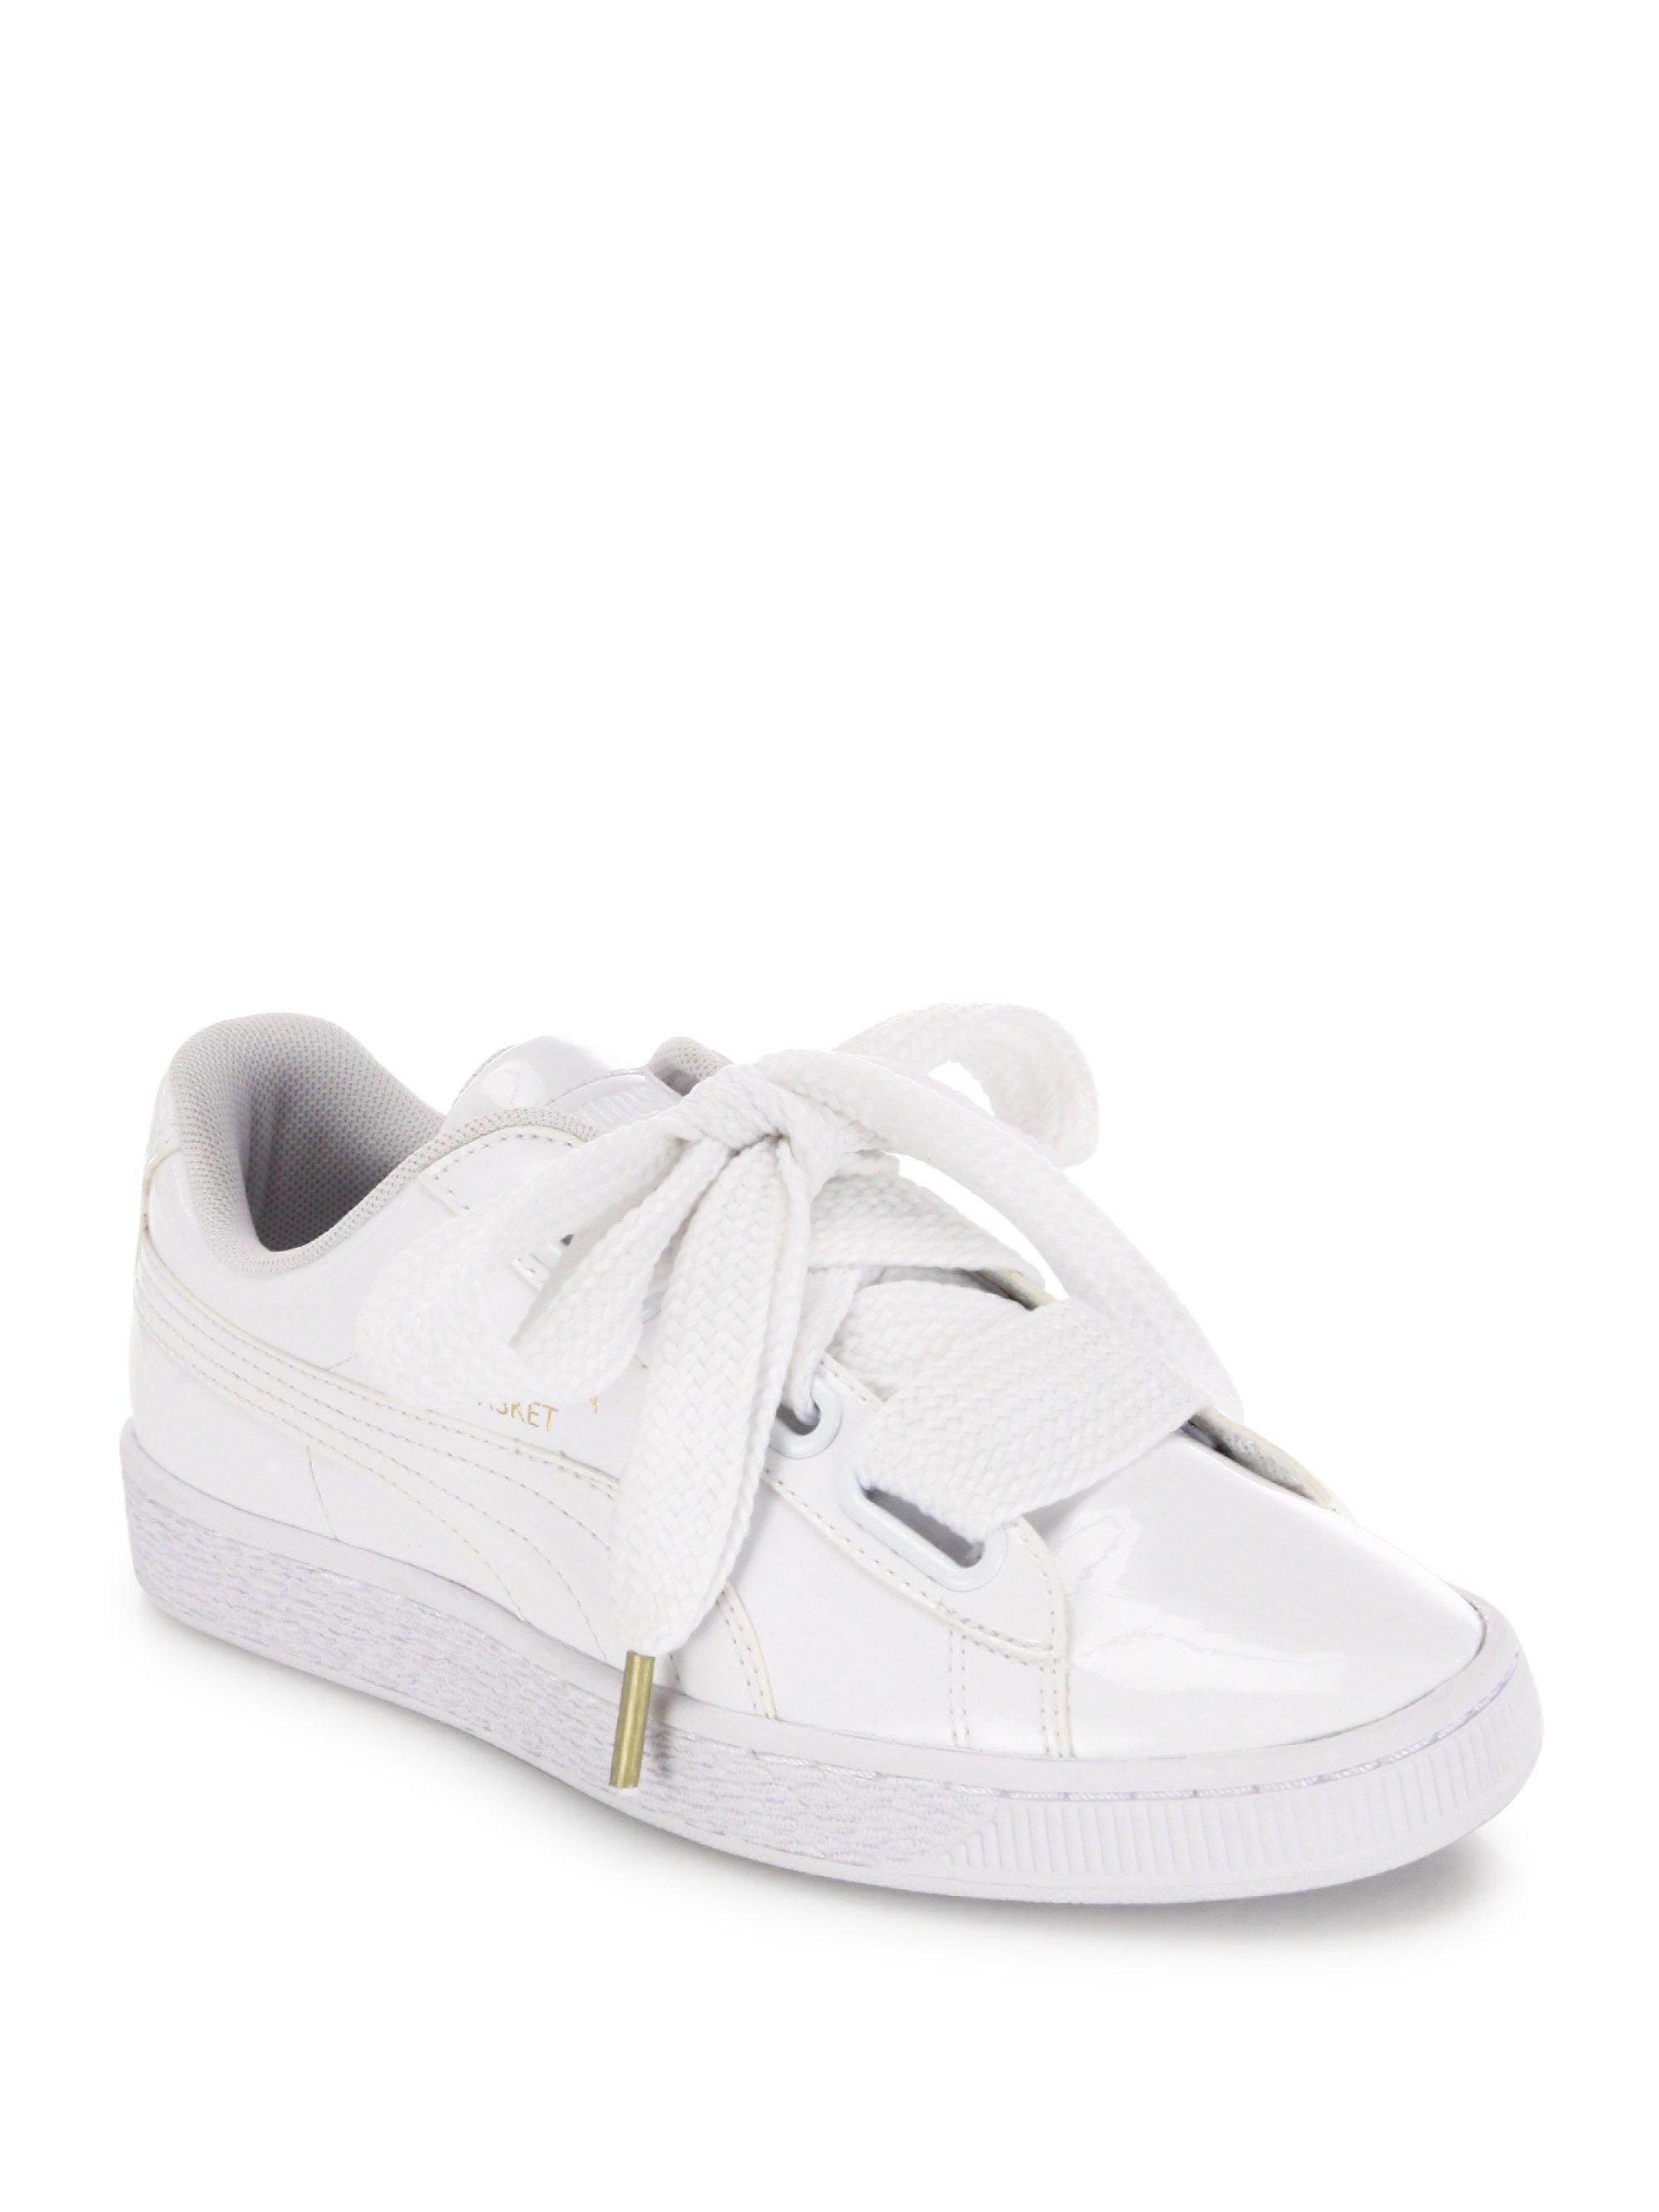 Basket Heart Patent Sneakers ($85) | Jennifer Aniston Wears at but During the Day, This Is Her Summer Shoe | POPSUGAR Photo 8